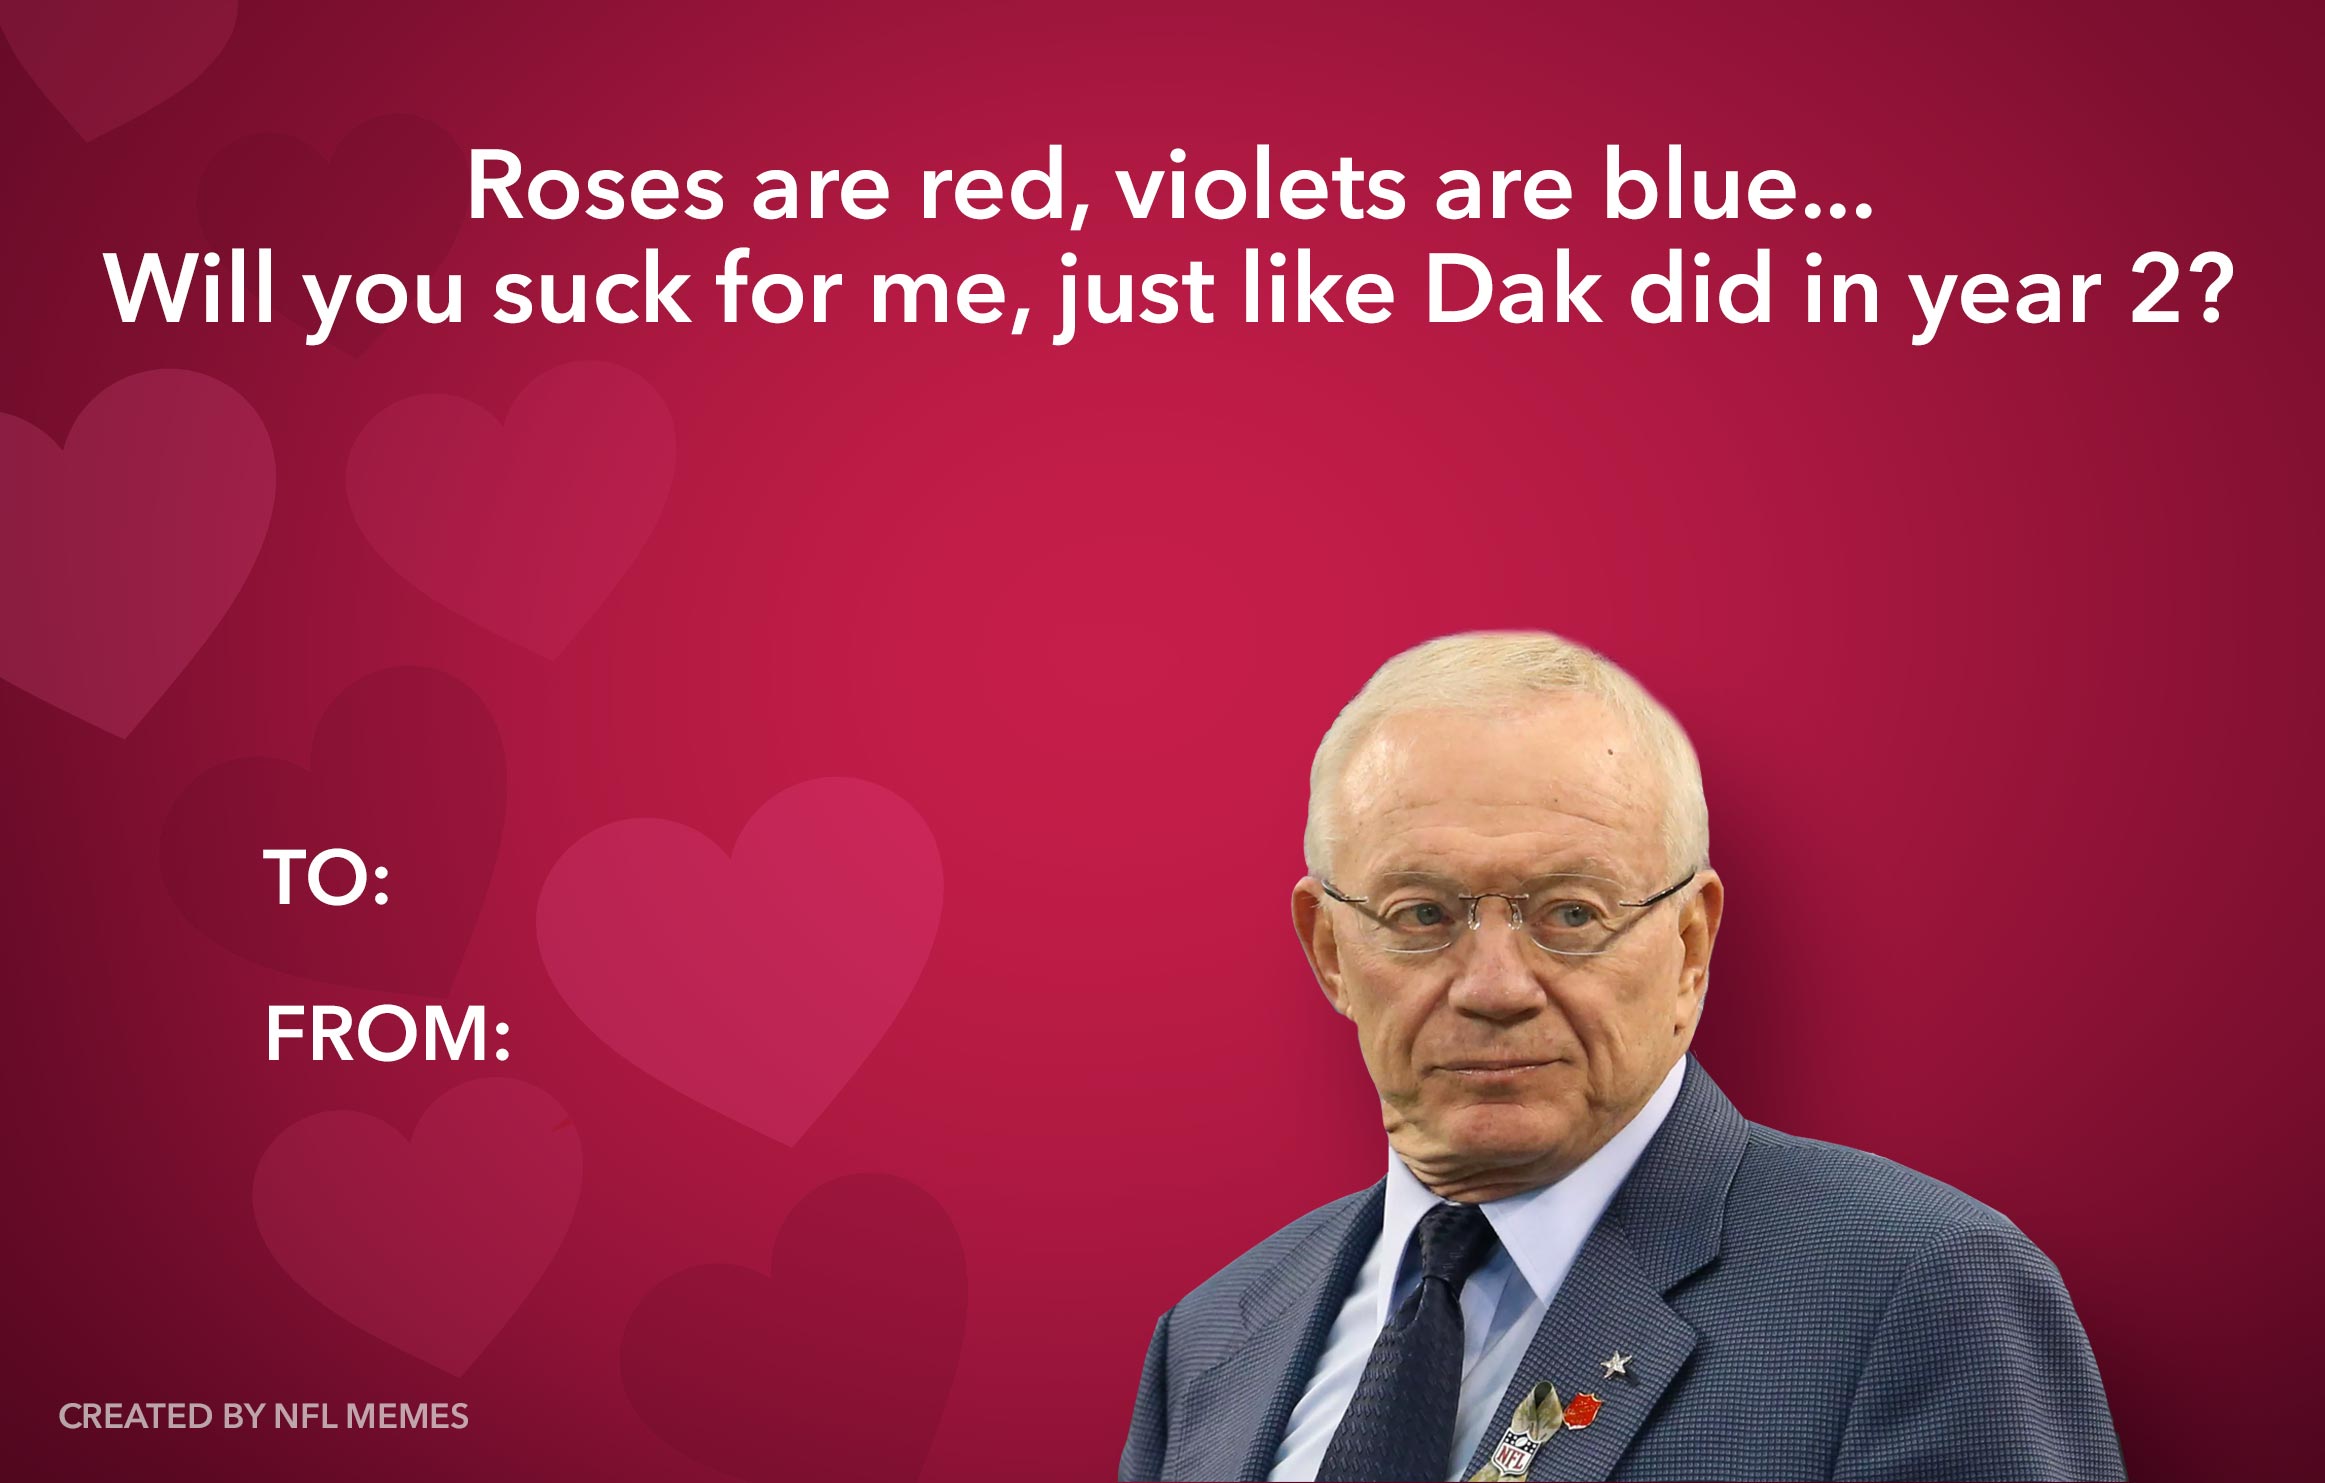 Here’s This Year’s Batch Of Hilarious NFL-Themed Valentine’s Day Cards (PICS)